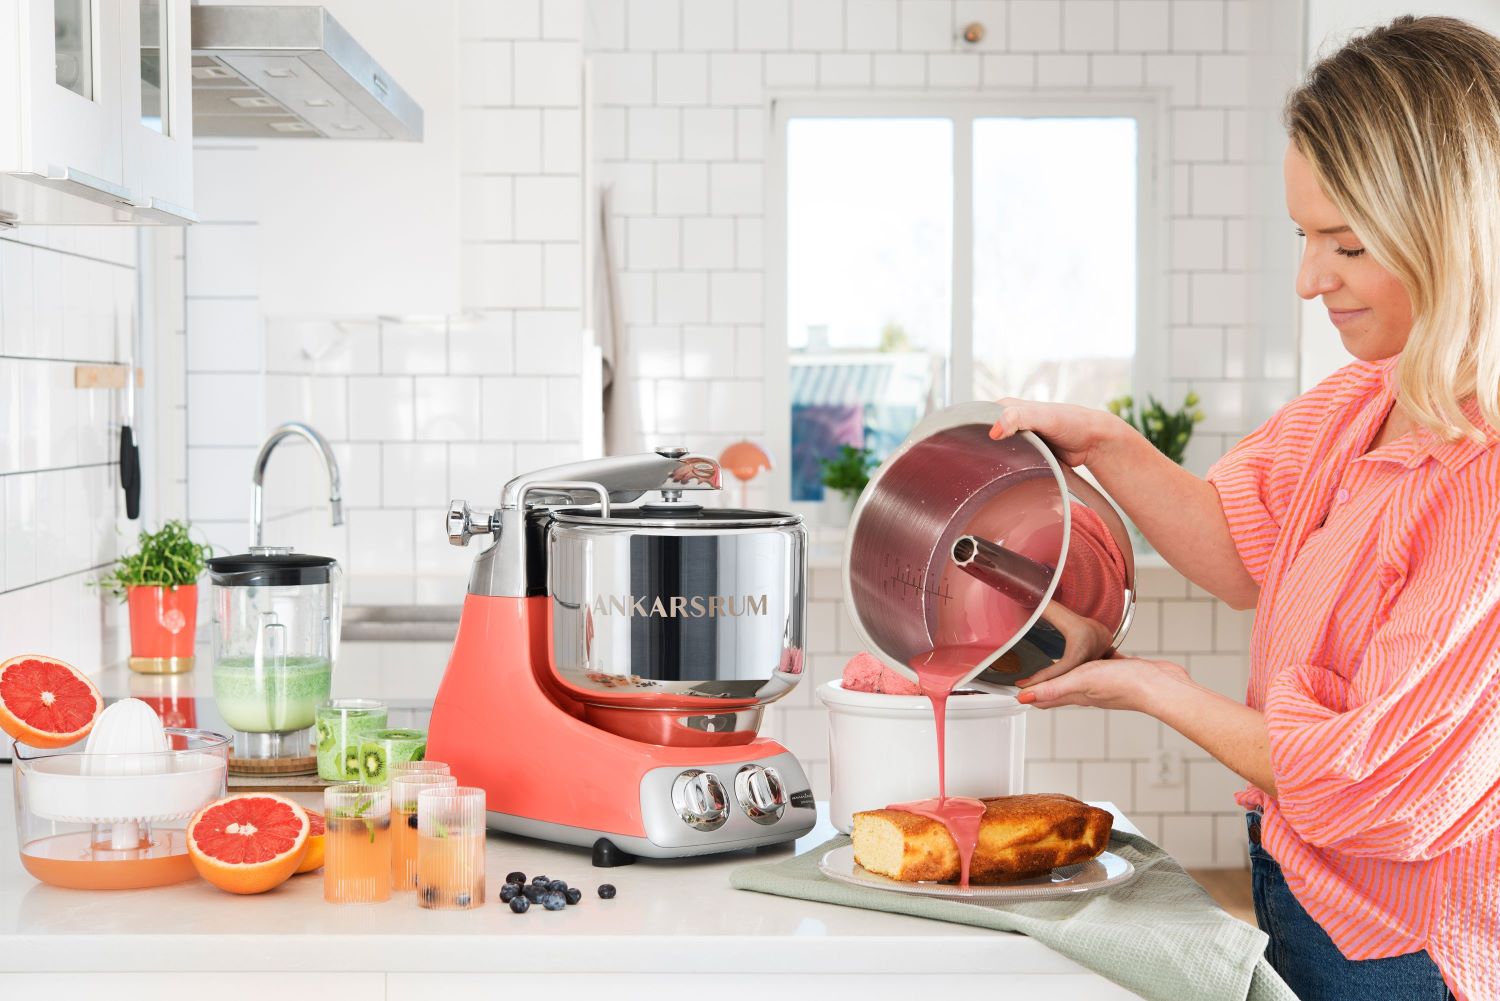 Upgrade Your Kitchen Gear with the Ankarsrum Assistent Original Stand Mixer